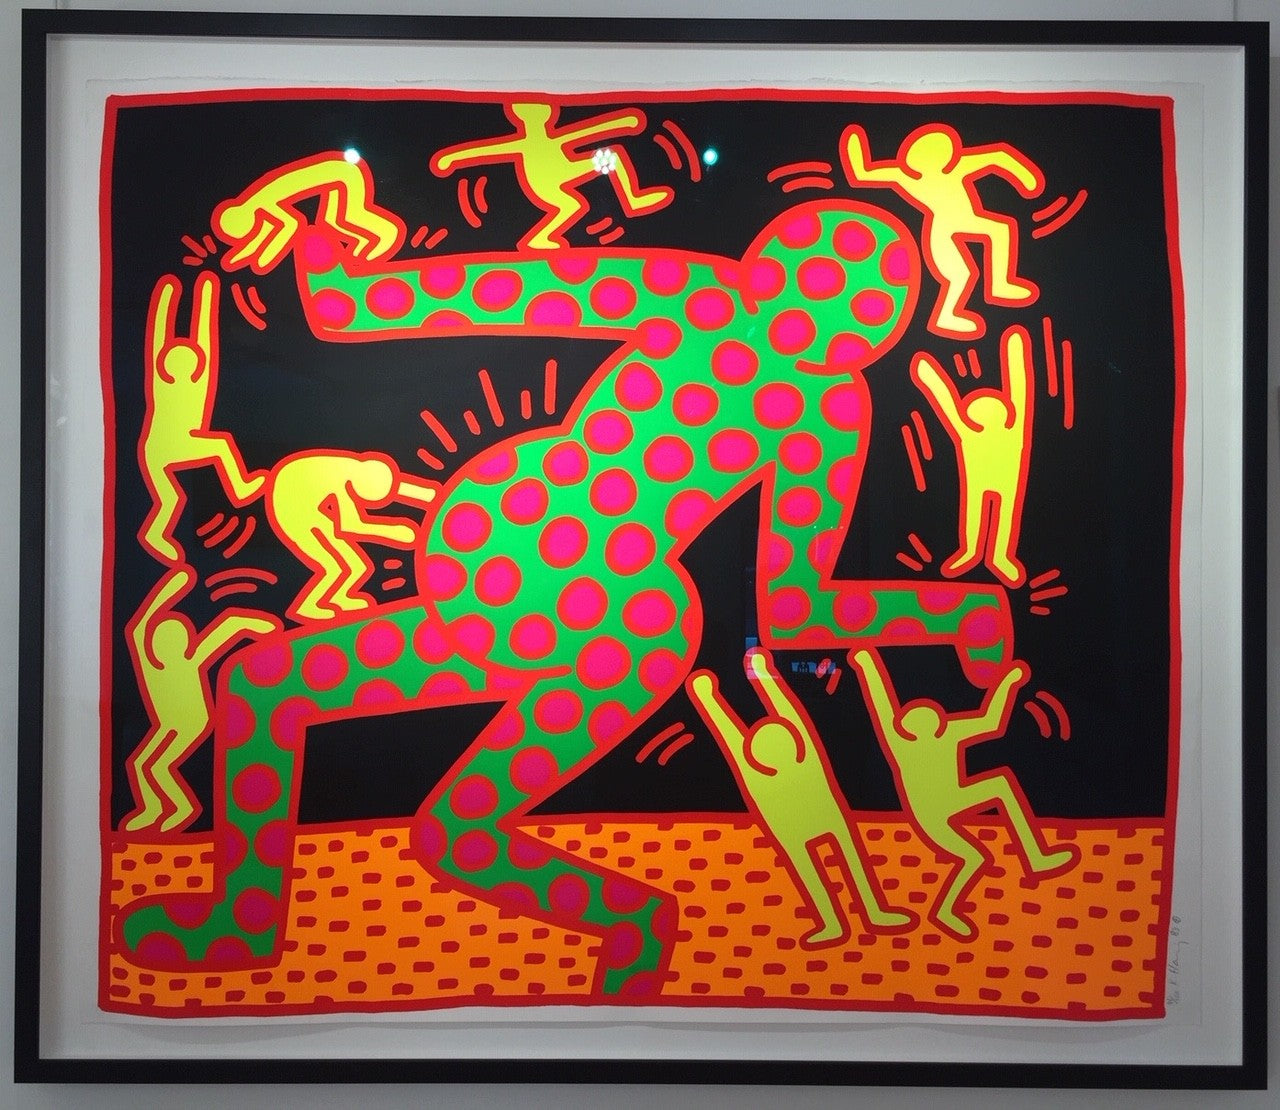 Keith Haring Fertility Plate 3 1983